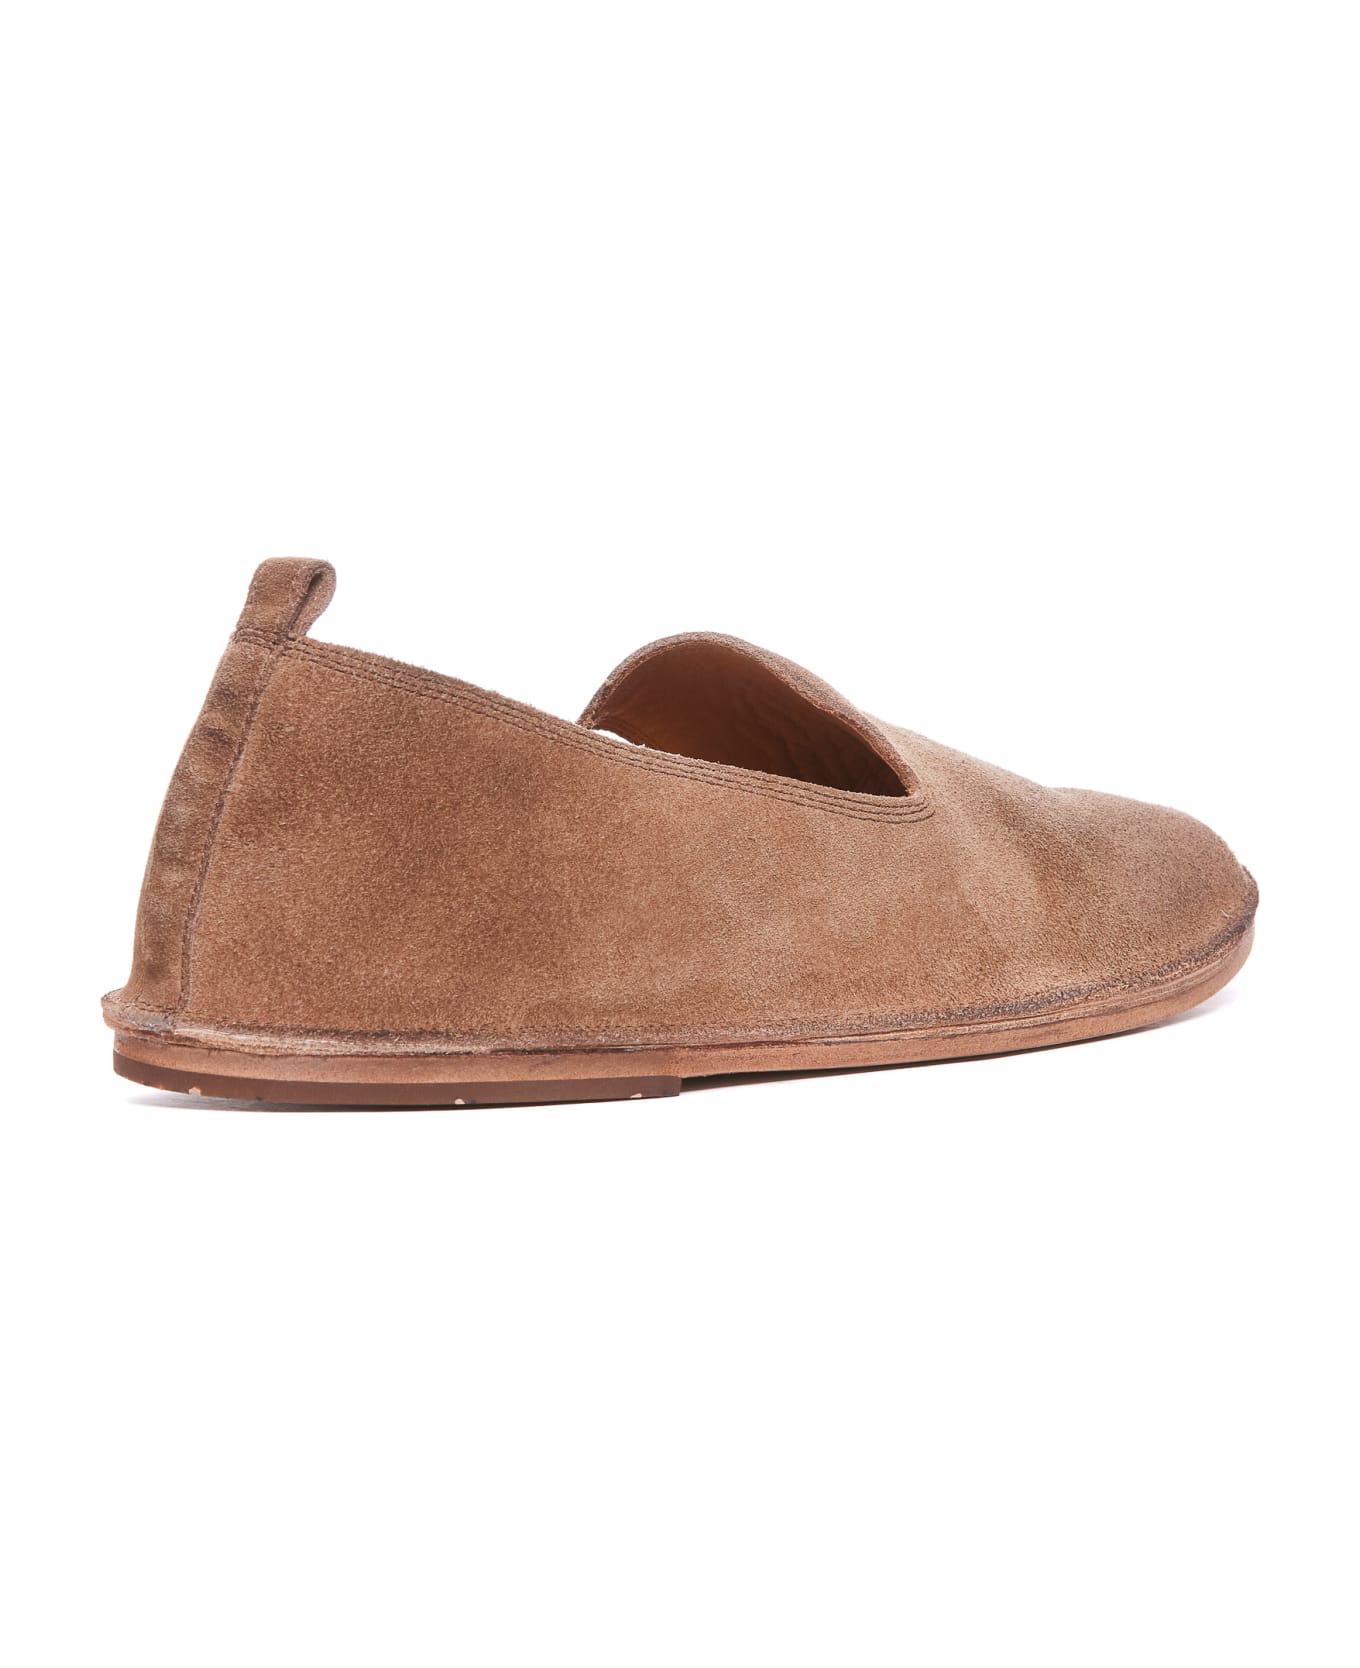 Marsell Strasacco Slippers - Beige